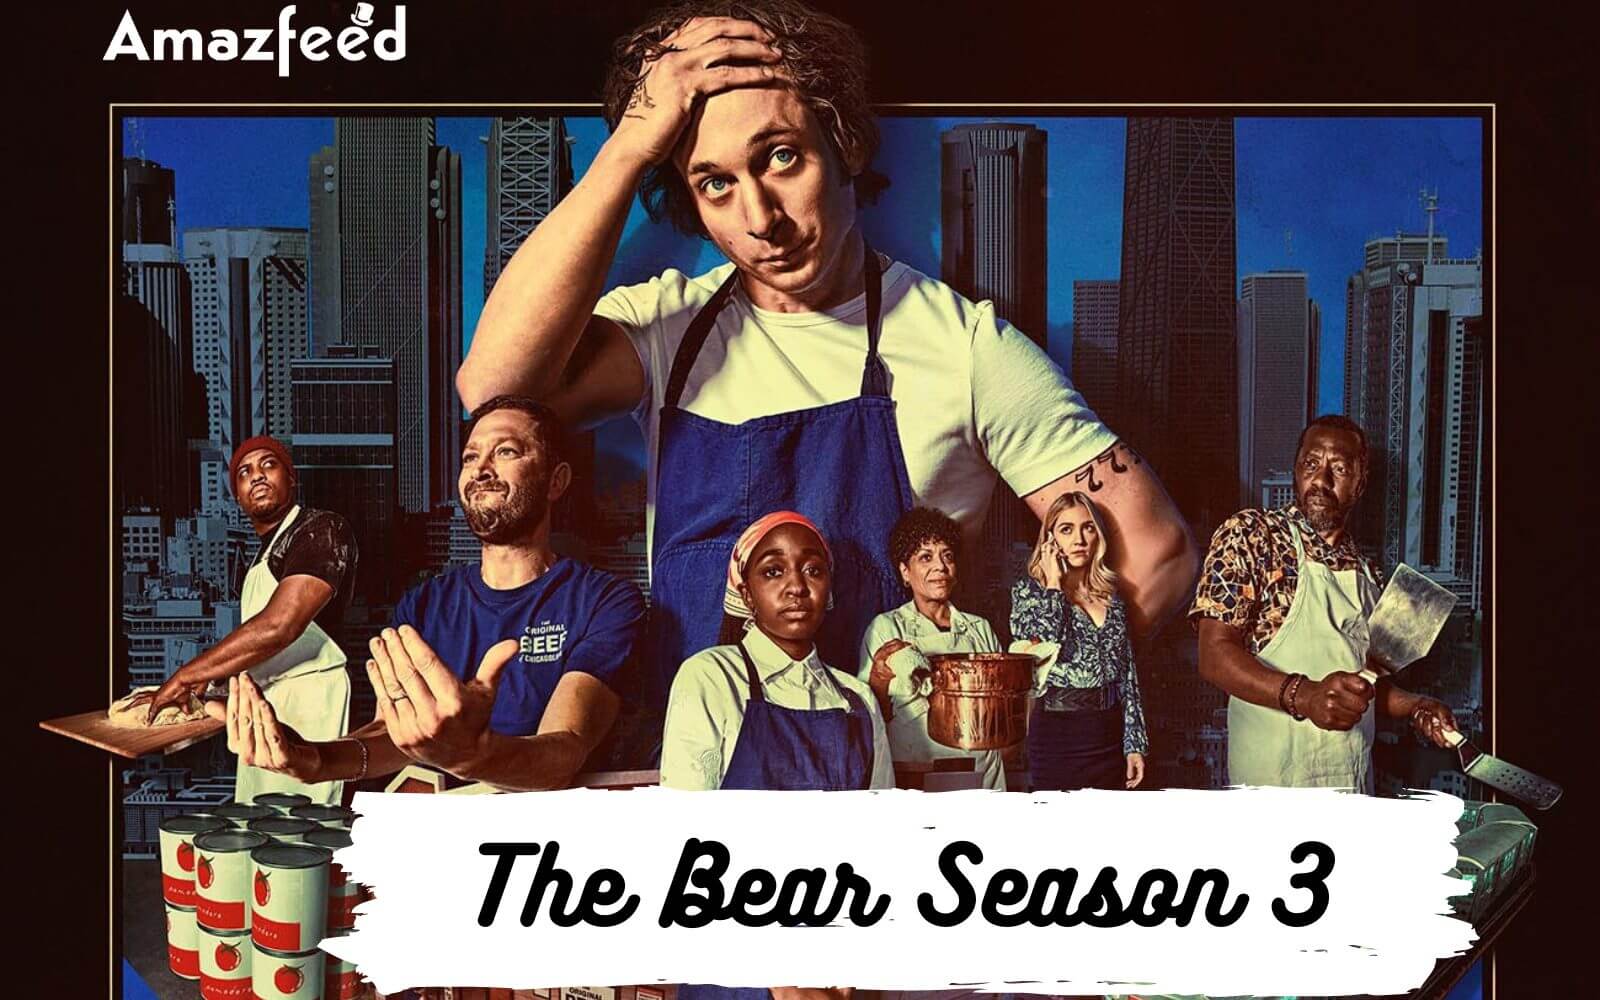 Is The Bear Season 3 Confirmed? Hulu Revealed a Big Announcement? The